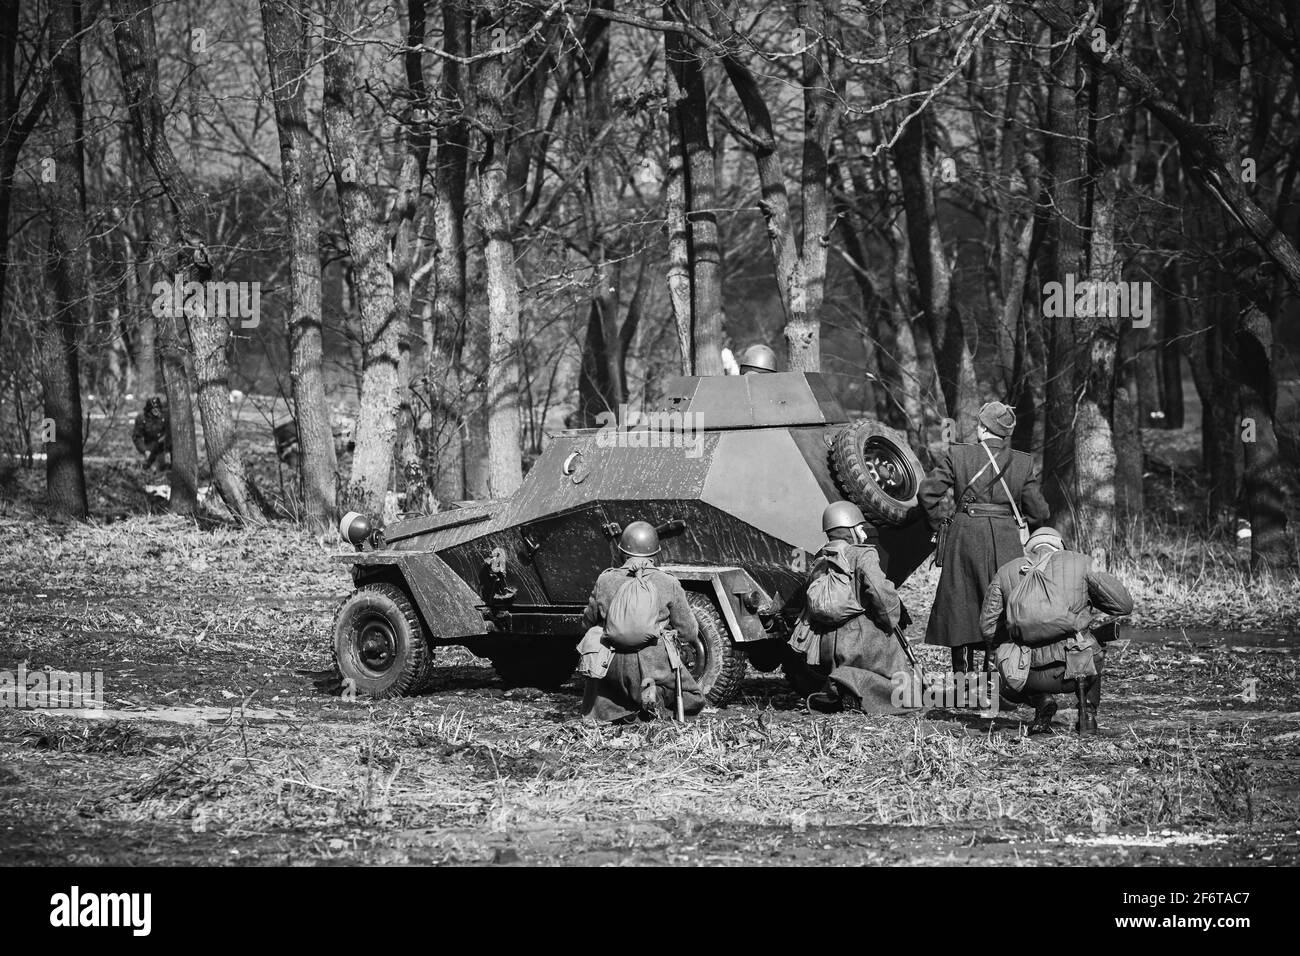 Group Of Reenactors Dressed As Russian Soviet Red Army Soldiers Of World War II Go On Offensive Under Cover Of Armored Soviet Scout Car. Historical Stock Photo